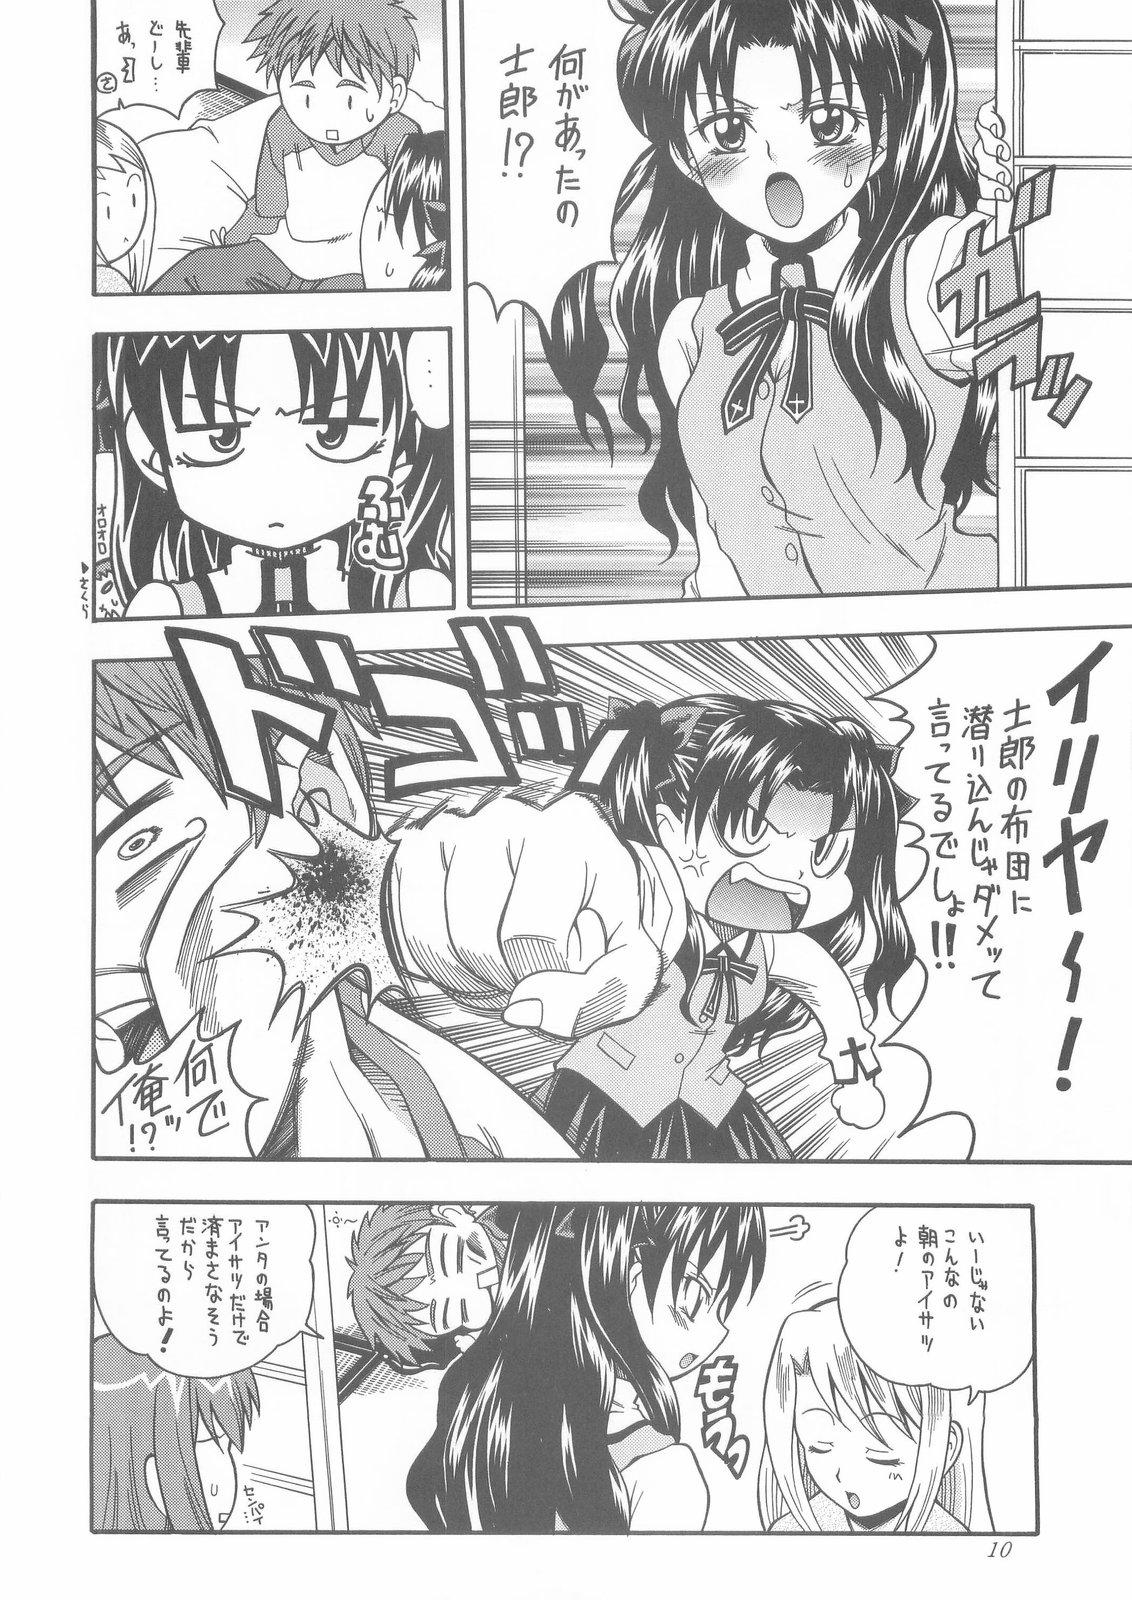 Family Taboo MONOCHROME - Fate stay night Mama - Page 10